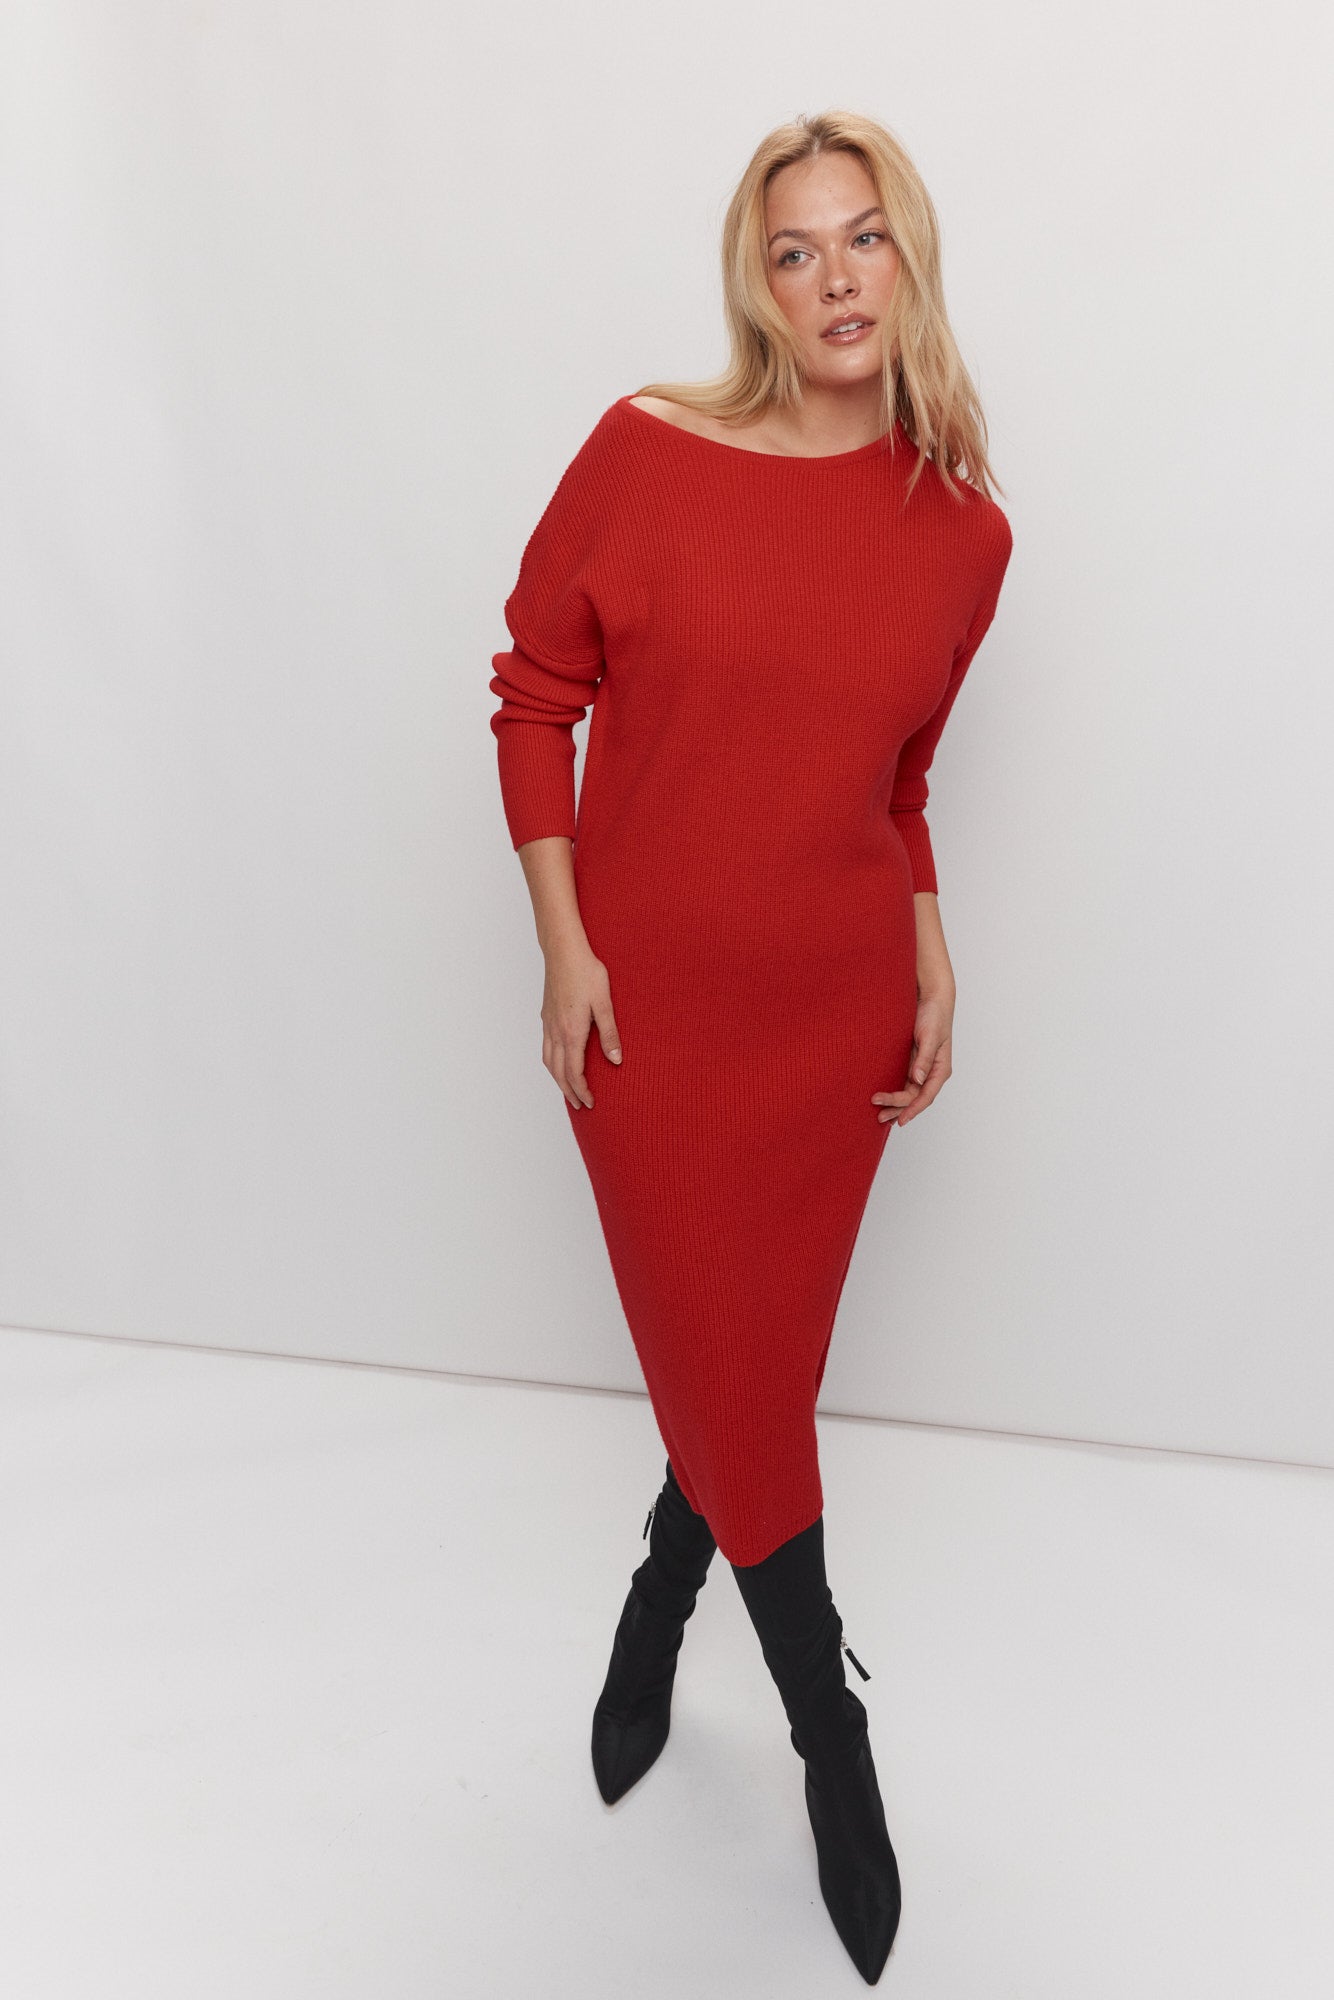 Long red knit dress with boat neckline | Jua